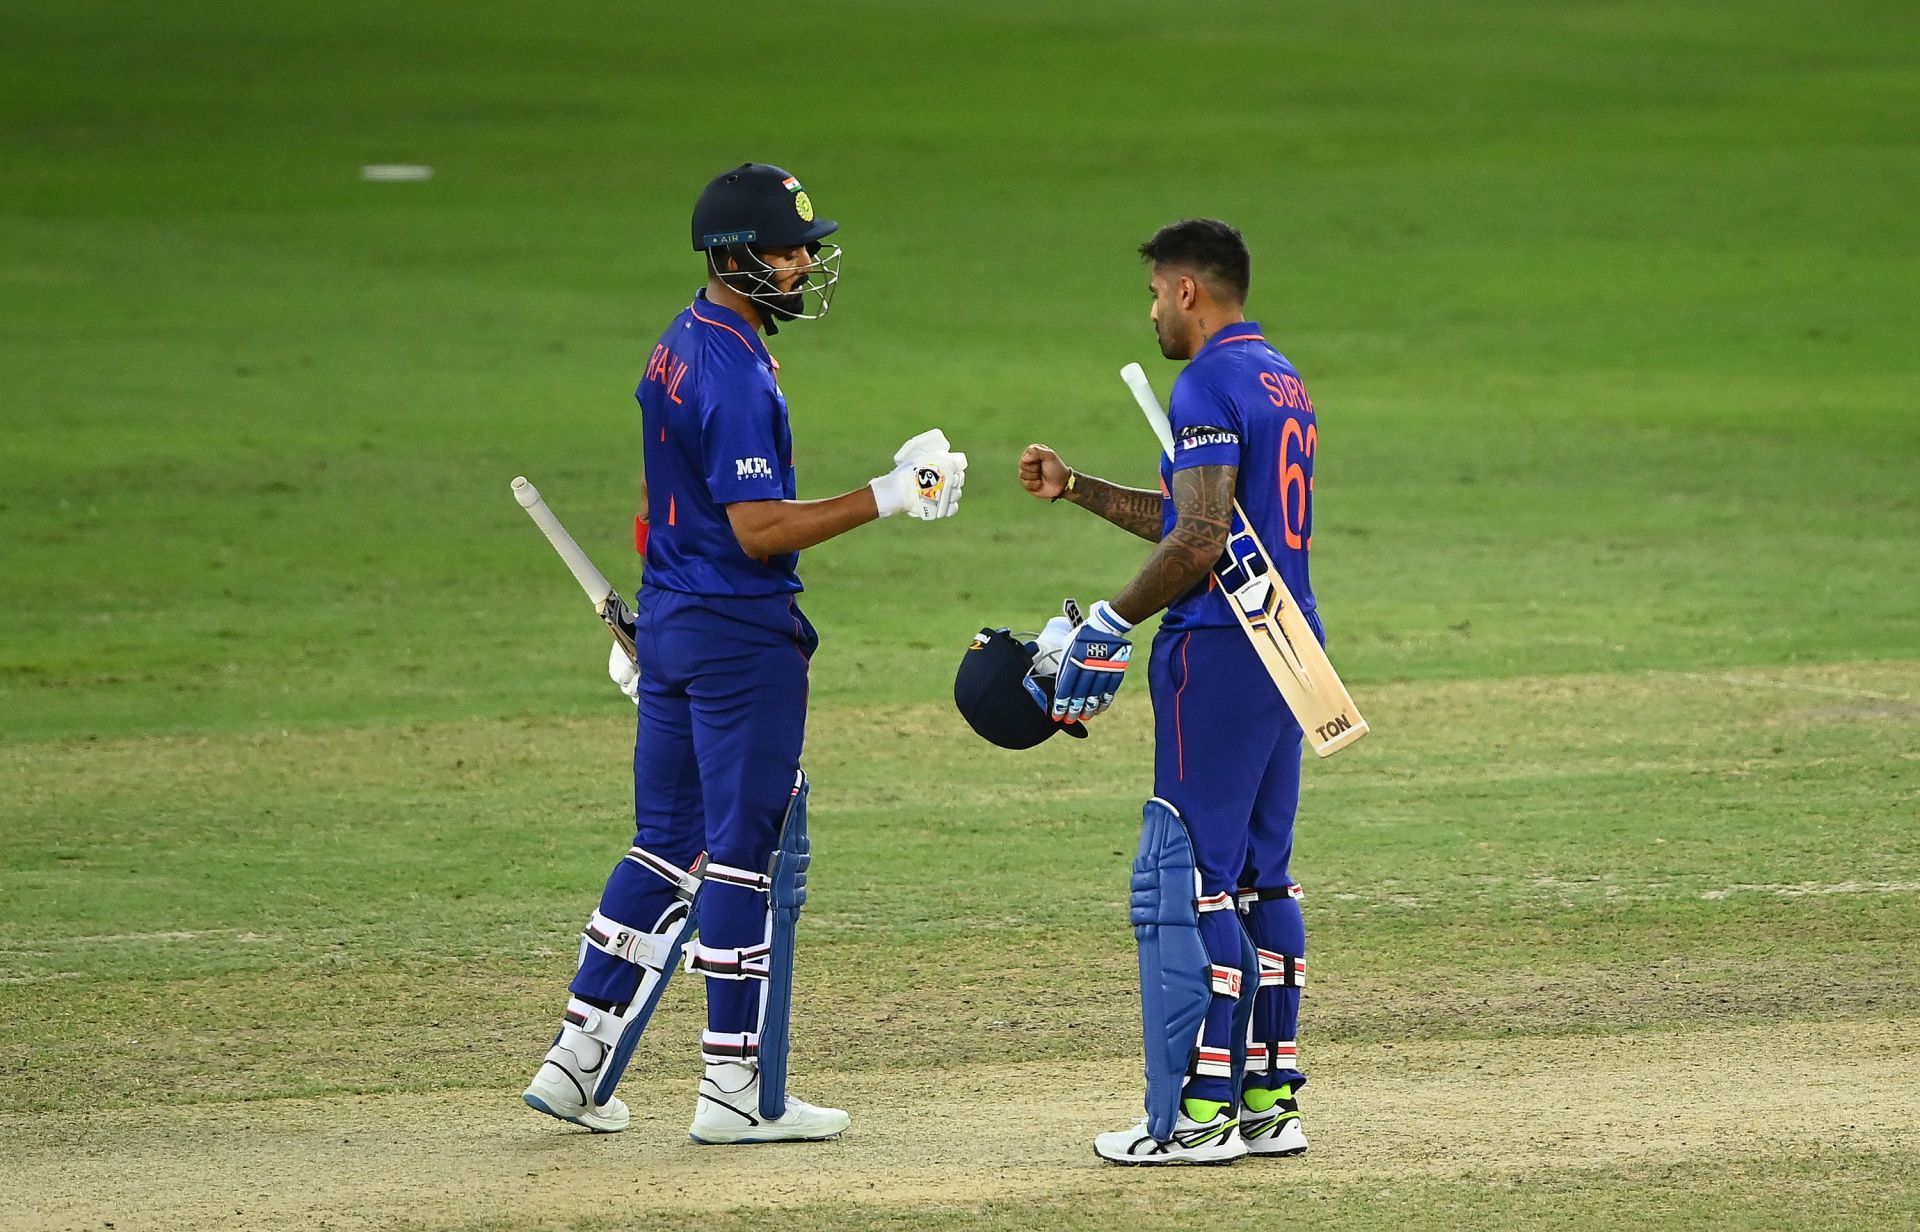 KL Rahul (L) and Suryakumar Yadav in action during the ICC T20 World Cup 2021